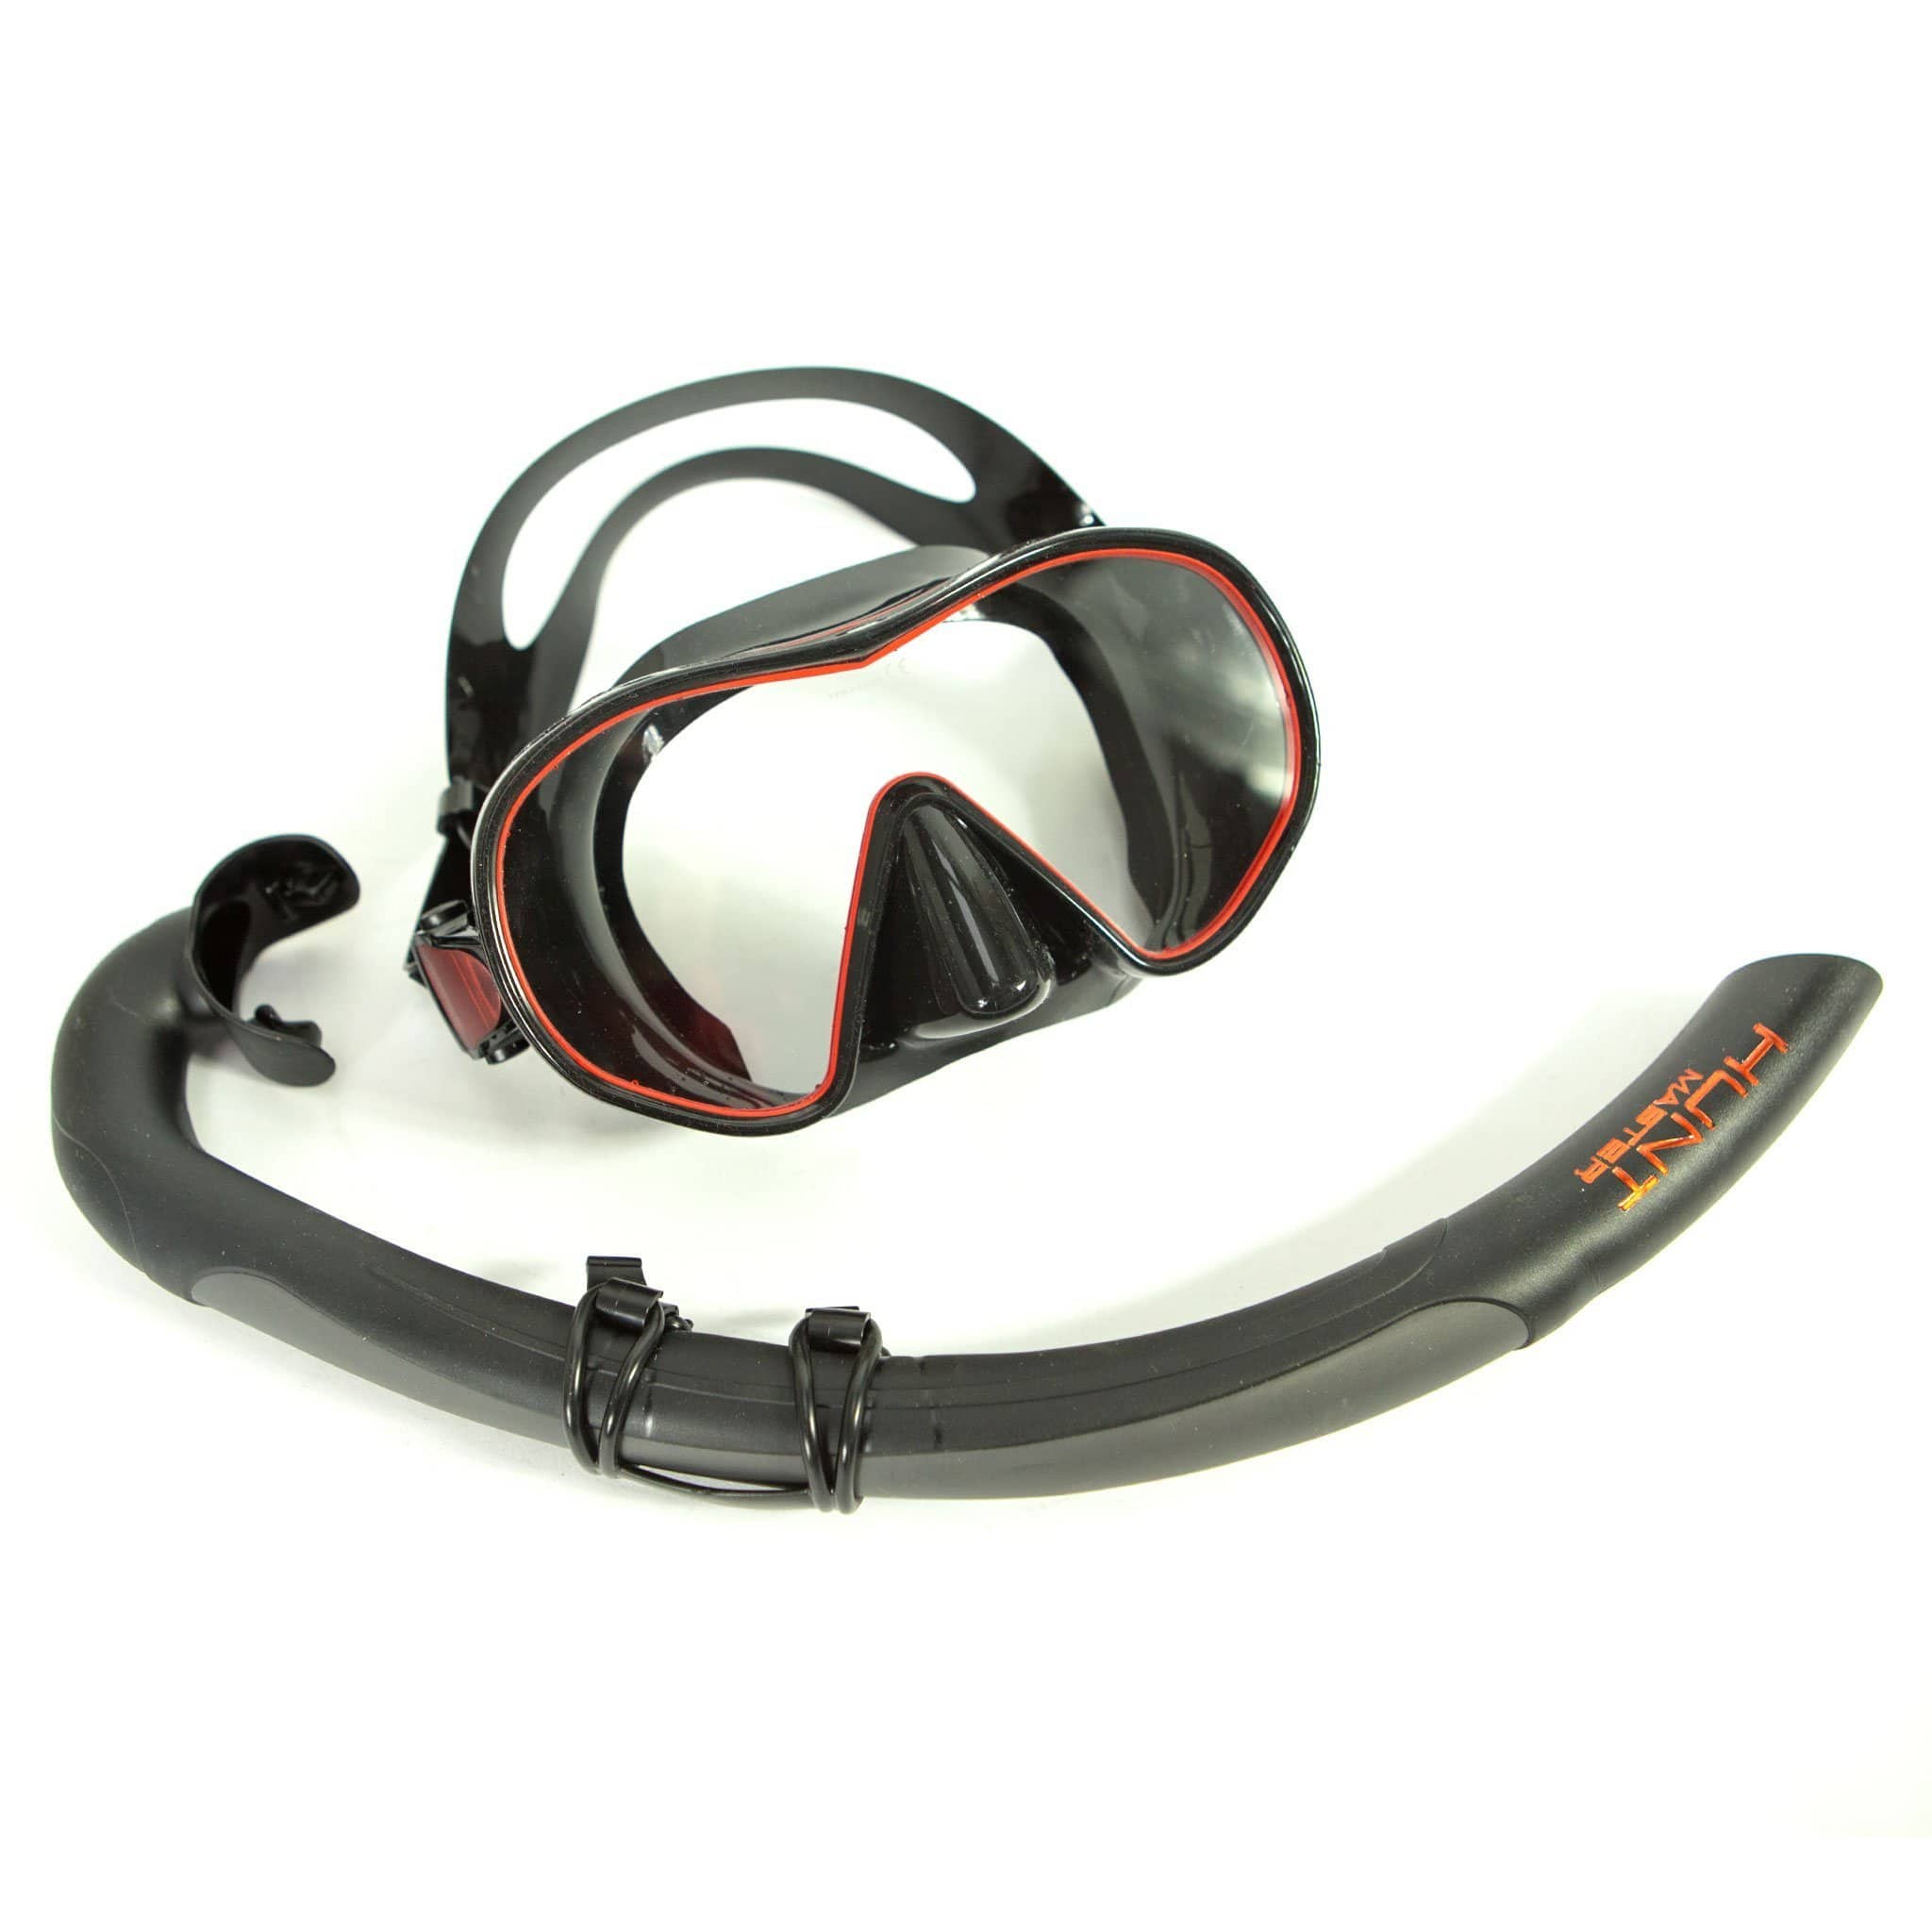 HuntMaster Scout Single Lens Diving Mask - Black and Red